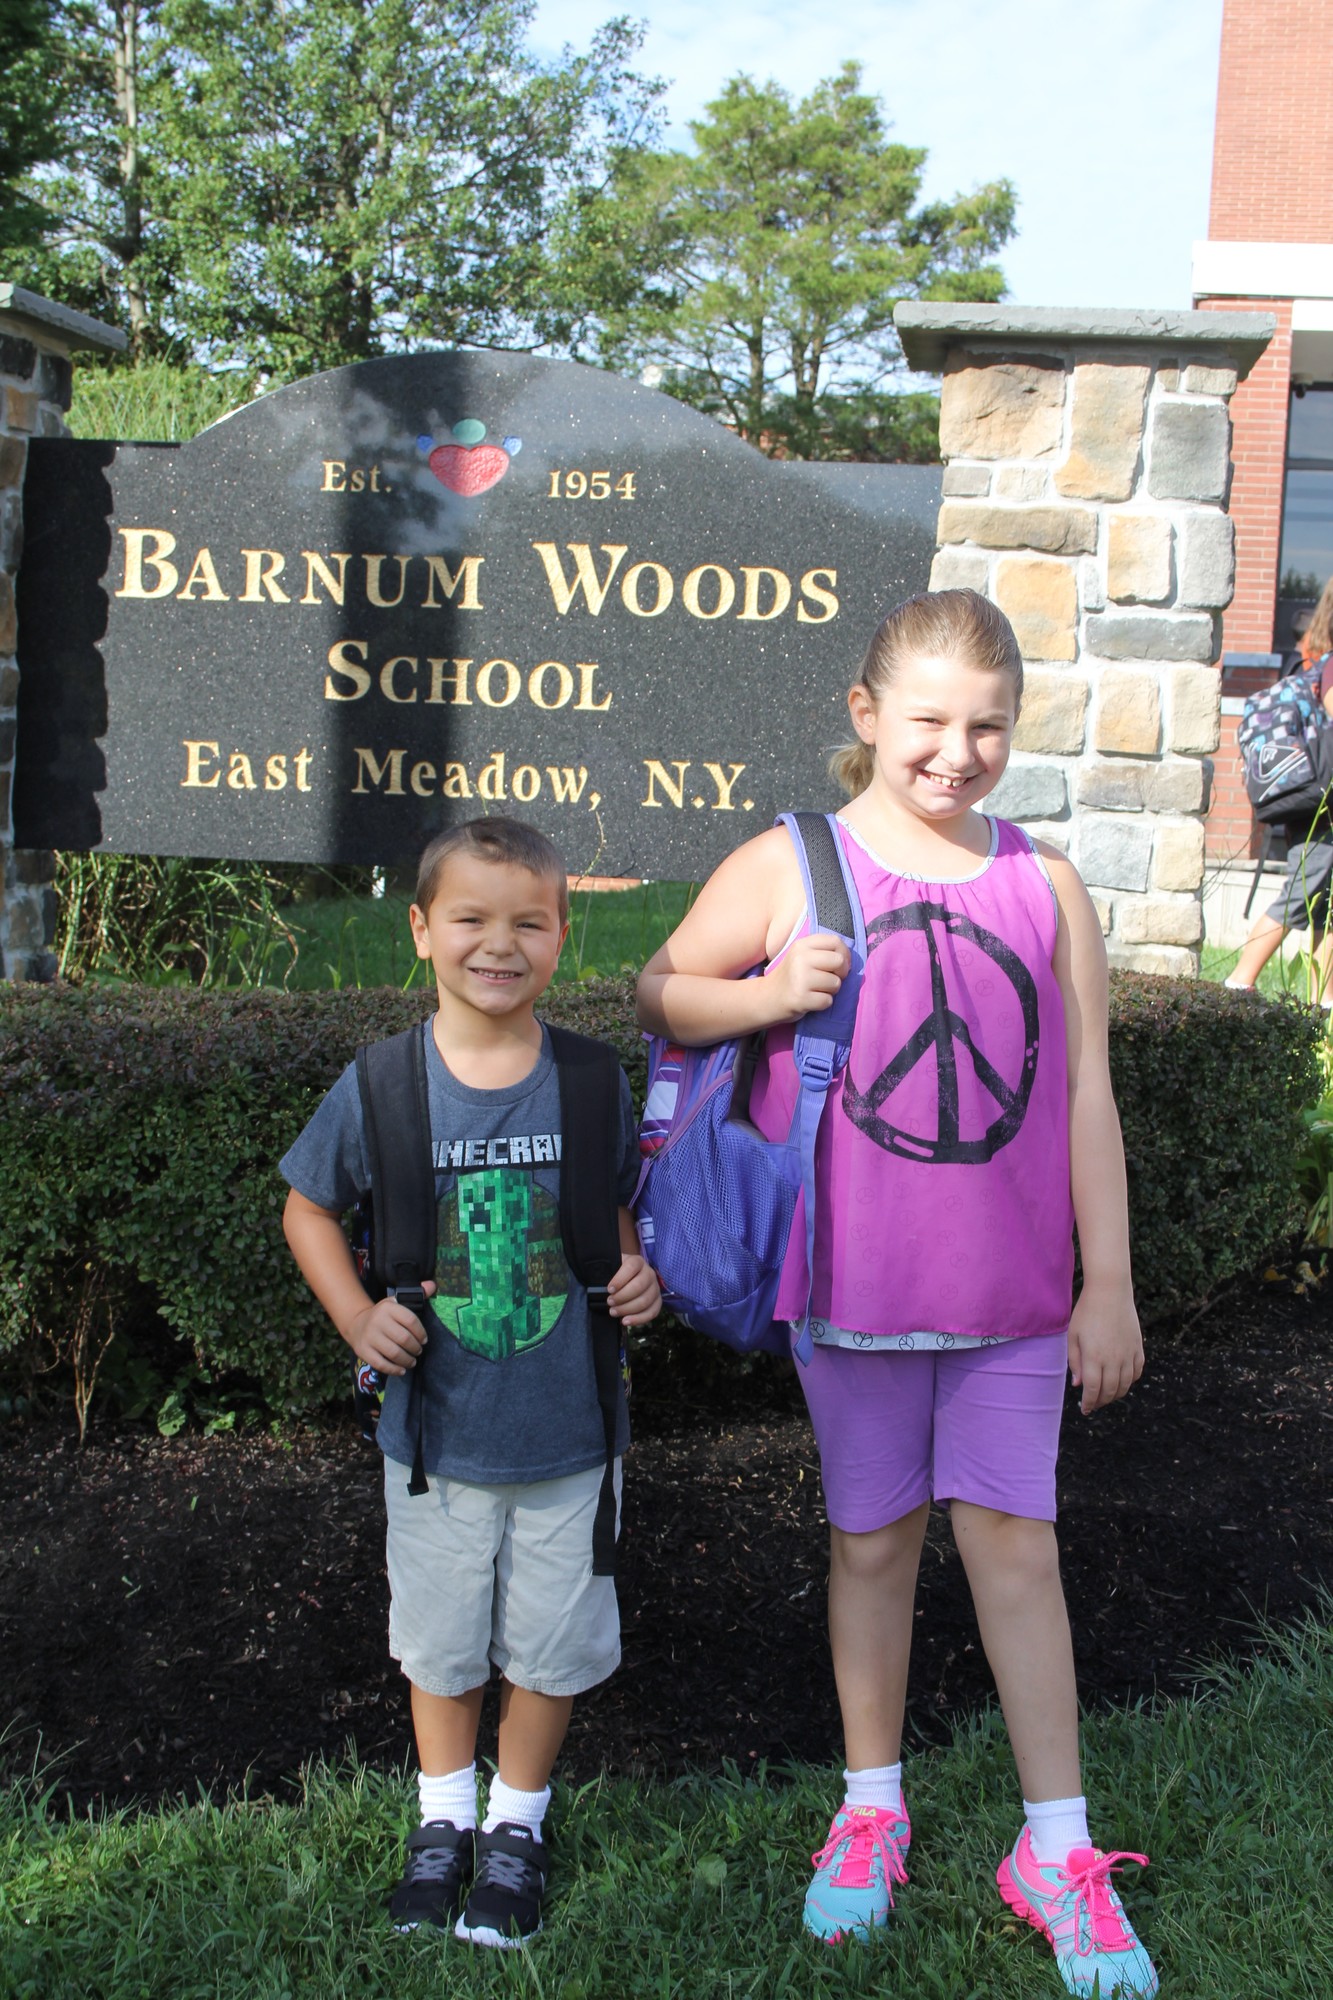 David Machado is entering kindergarten this year, and his sister Kacie is going into fifth grade.